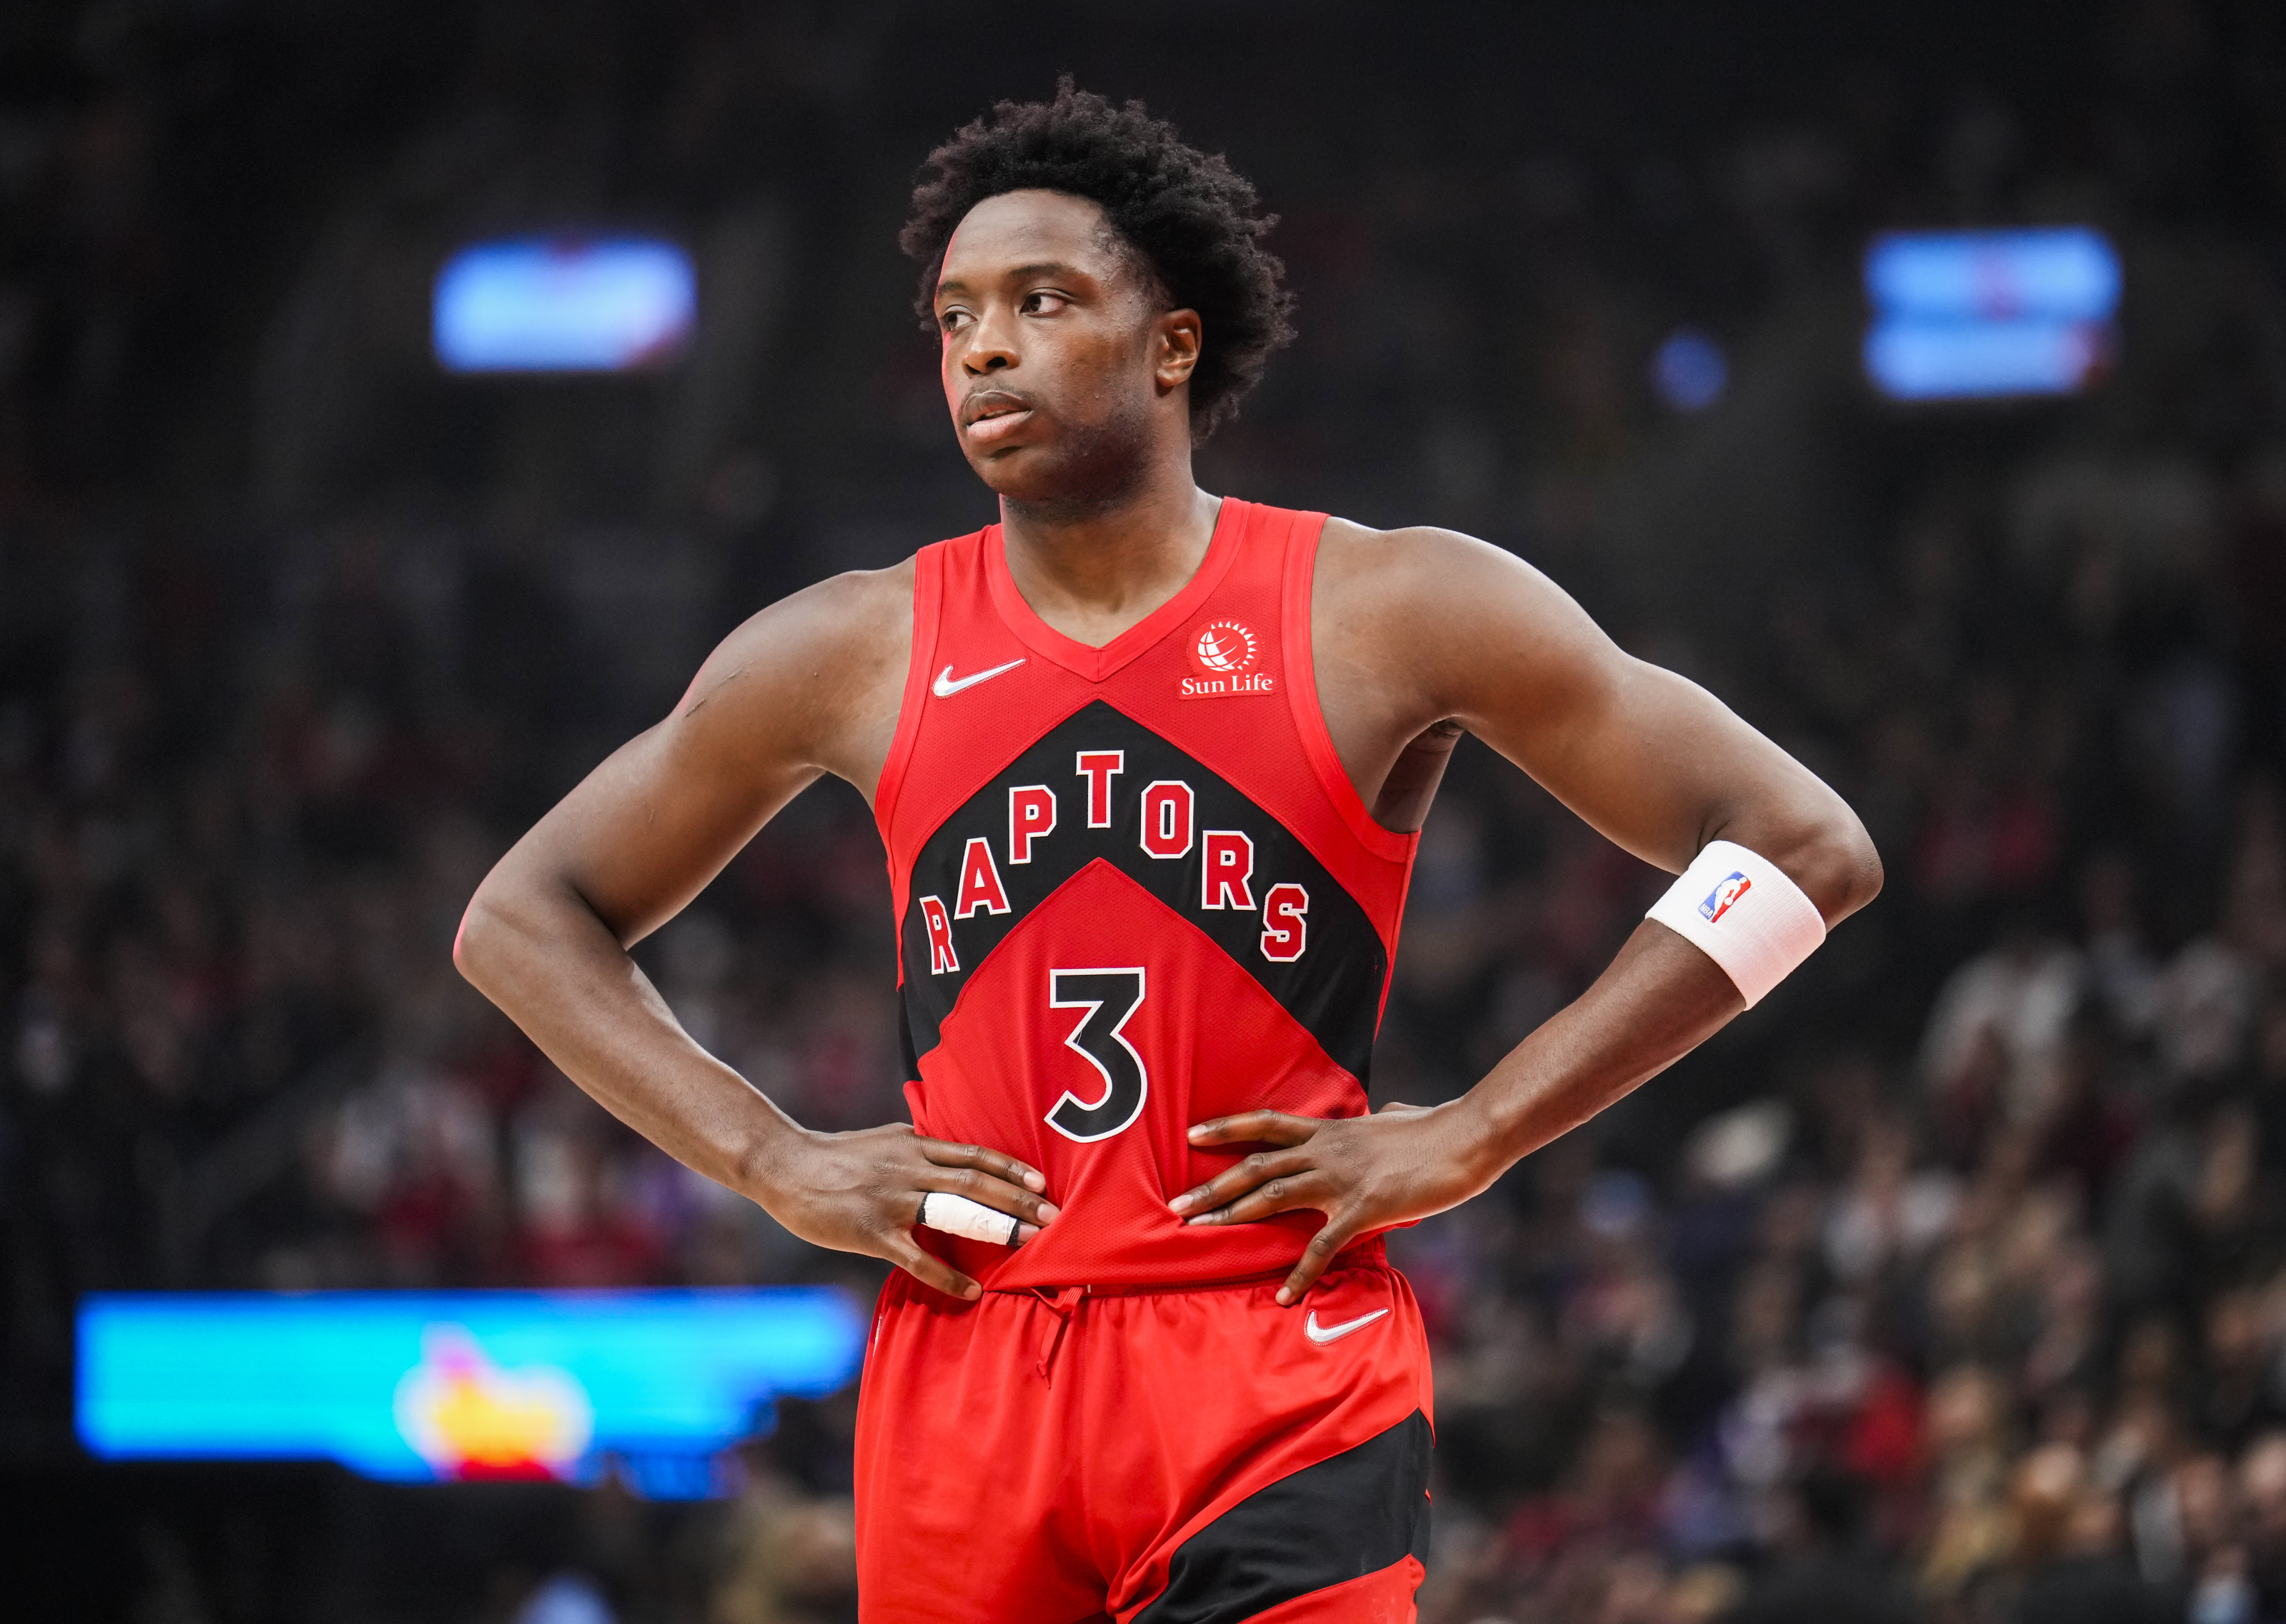 NBA News: A mystery team has emerged as a suitor for OG Anunoby